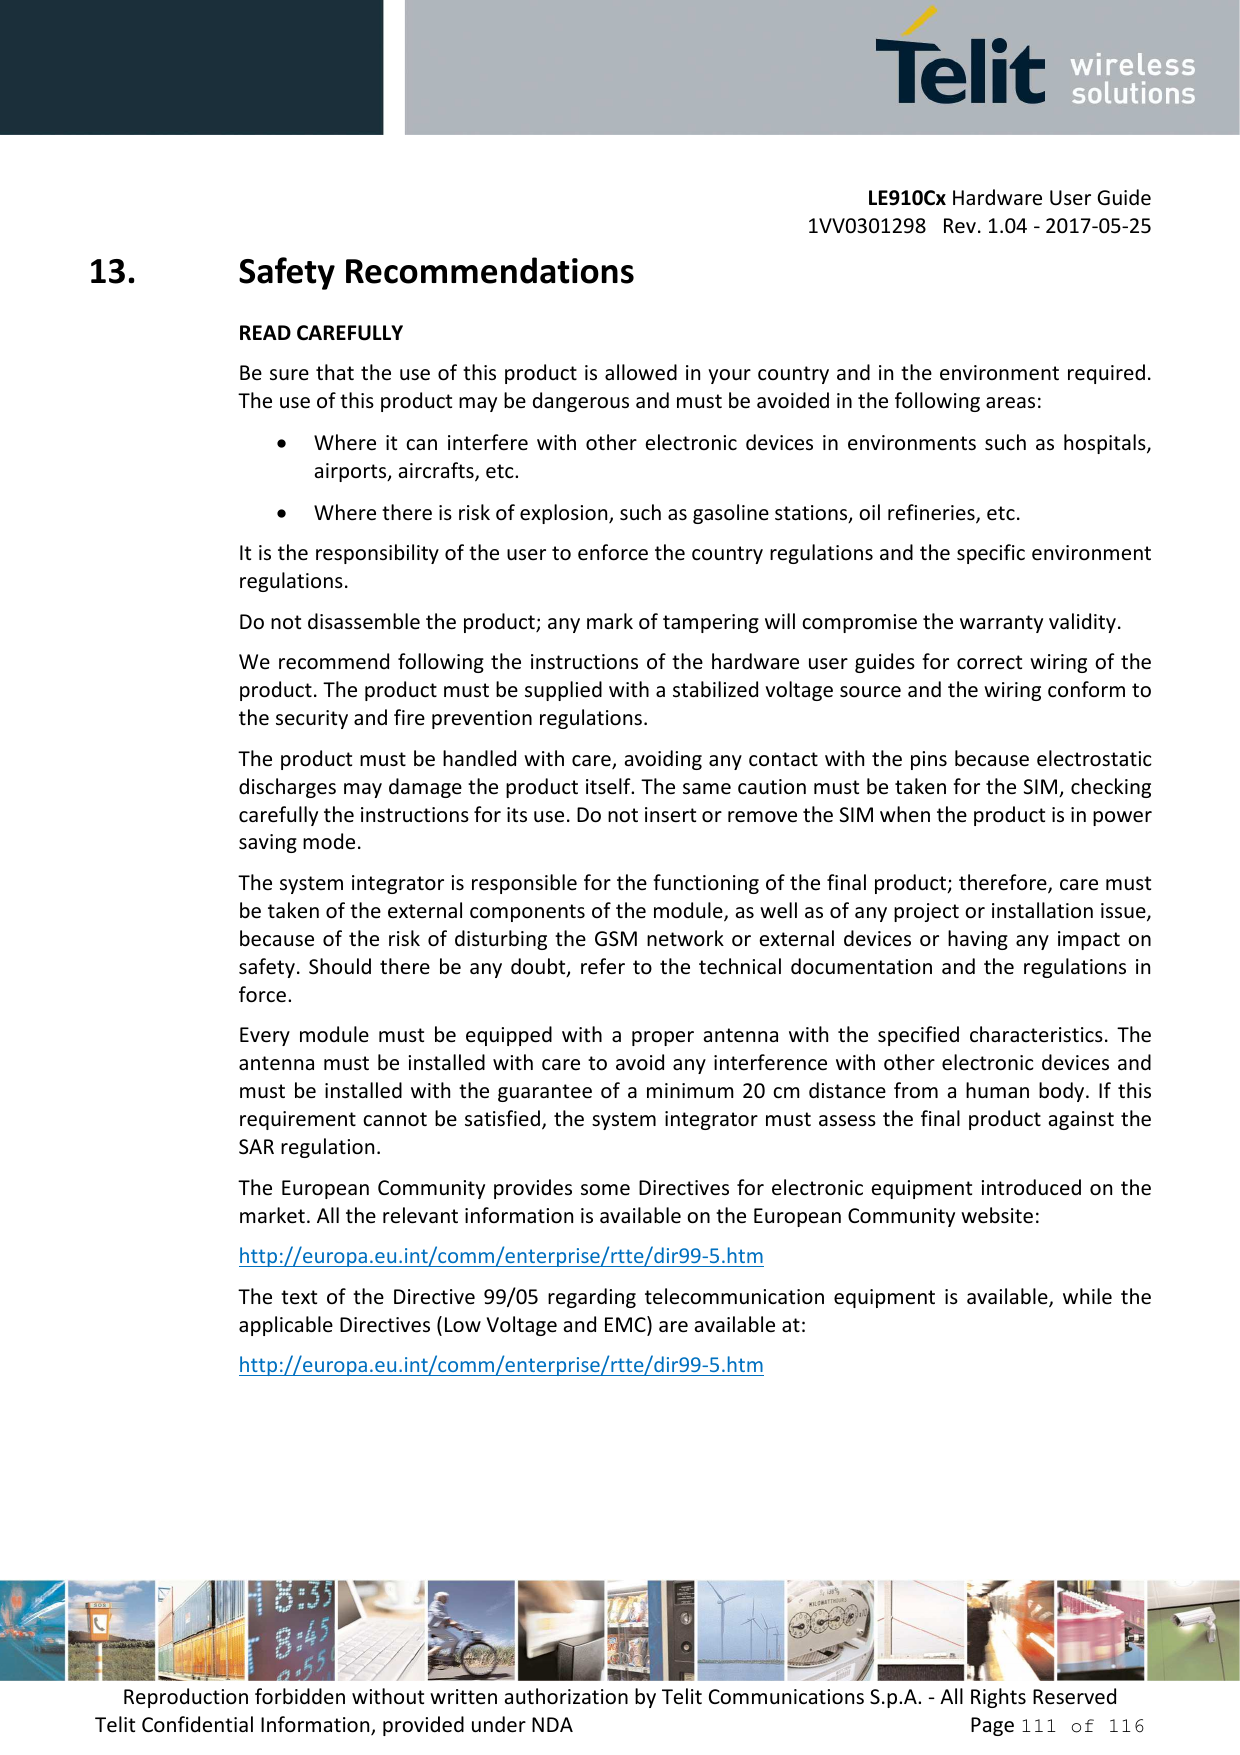         LE910Cx Hardware User Guide 1VV0301298   Rev. 1.04 - 2017-05-25 Reproduction forbidden without written authorization by Telit Communications S.p.A. - All Rights Reserved Telit Confidential Information, provided under NDA                 Page 111 of 116 13. Safety Recommendations READ CAREFULLY Be sure that the use of this product is allowed in your country and in the environment required. The use of this product may be dangerous and must be avoided in the following areas: • Where it  can  interfere  with other  electronic  devices  in  environments  such  as  hospitals, airports, aircrafts, etc. • Where there is risk of explosion, such as gasoline stations, oil refineries, etc.  It is the responsibility of the user to enforce the country regulations and the specific environment regulations. Do not disassemble the product; any mark of tampering will compromise the warranty validity. We recommend following the instructions of the hardware user guides for correct wiring of the product. The product must be supplied with a stabilized voltage source and the wiring conform to the security and fire prevention regulations. The product must be handled with care, avoiding any contact with the pins because electrostatic discharges may damage the product itself. The same caution must be taken for the SIM, checking carefully the instructions for its use. Do not insert or remove the SIM when the product is in power saving mode. The system integrator is responsible for the functioning of the final product; therefore, care must be taken of the external components of the module, as well as of any project or installation issue, because of the risk of disturbing the  GSM network or  external devices or  having any impact on safety. Should there  be any doubt,  refer to  the technical  documentation and  the regulations  in force. Every  module  must  be  equipped  with  a  proper  antenna  with  the  specified  characteristics.  The antenna must be installed with care to avoid any interference with other electronic devices and must be installed with  the guarantee of  a minimum 20 cm distance from a human body. If  this requirement cannot be satisfied, the system integrator must assess the final product against the SAR regulation. The European Community provides some Directives for electronic equipment introduced on the market. All the relevant information is available on the European Community website: http://europa.eu.int/comm/enterprise/rtte/dir99-5.htm The  text  of  the  Directive  99/05  regarding  telecommunication  equipment  is  available,  while  the applicable Directives (Low Voltage and EMC) are available at: http://europa.eu.int/comm/enterprise/rtte/dir99-5.htm  